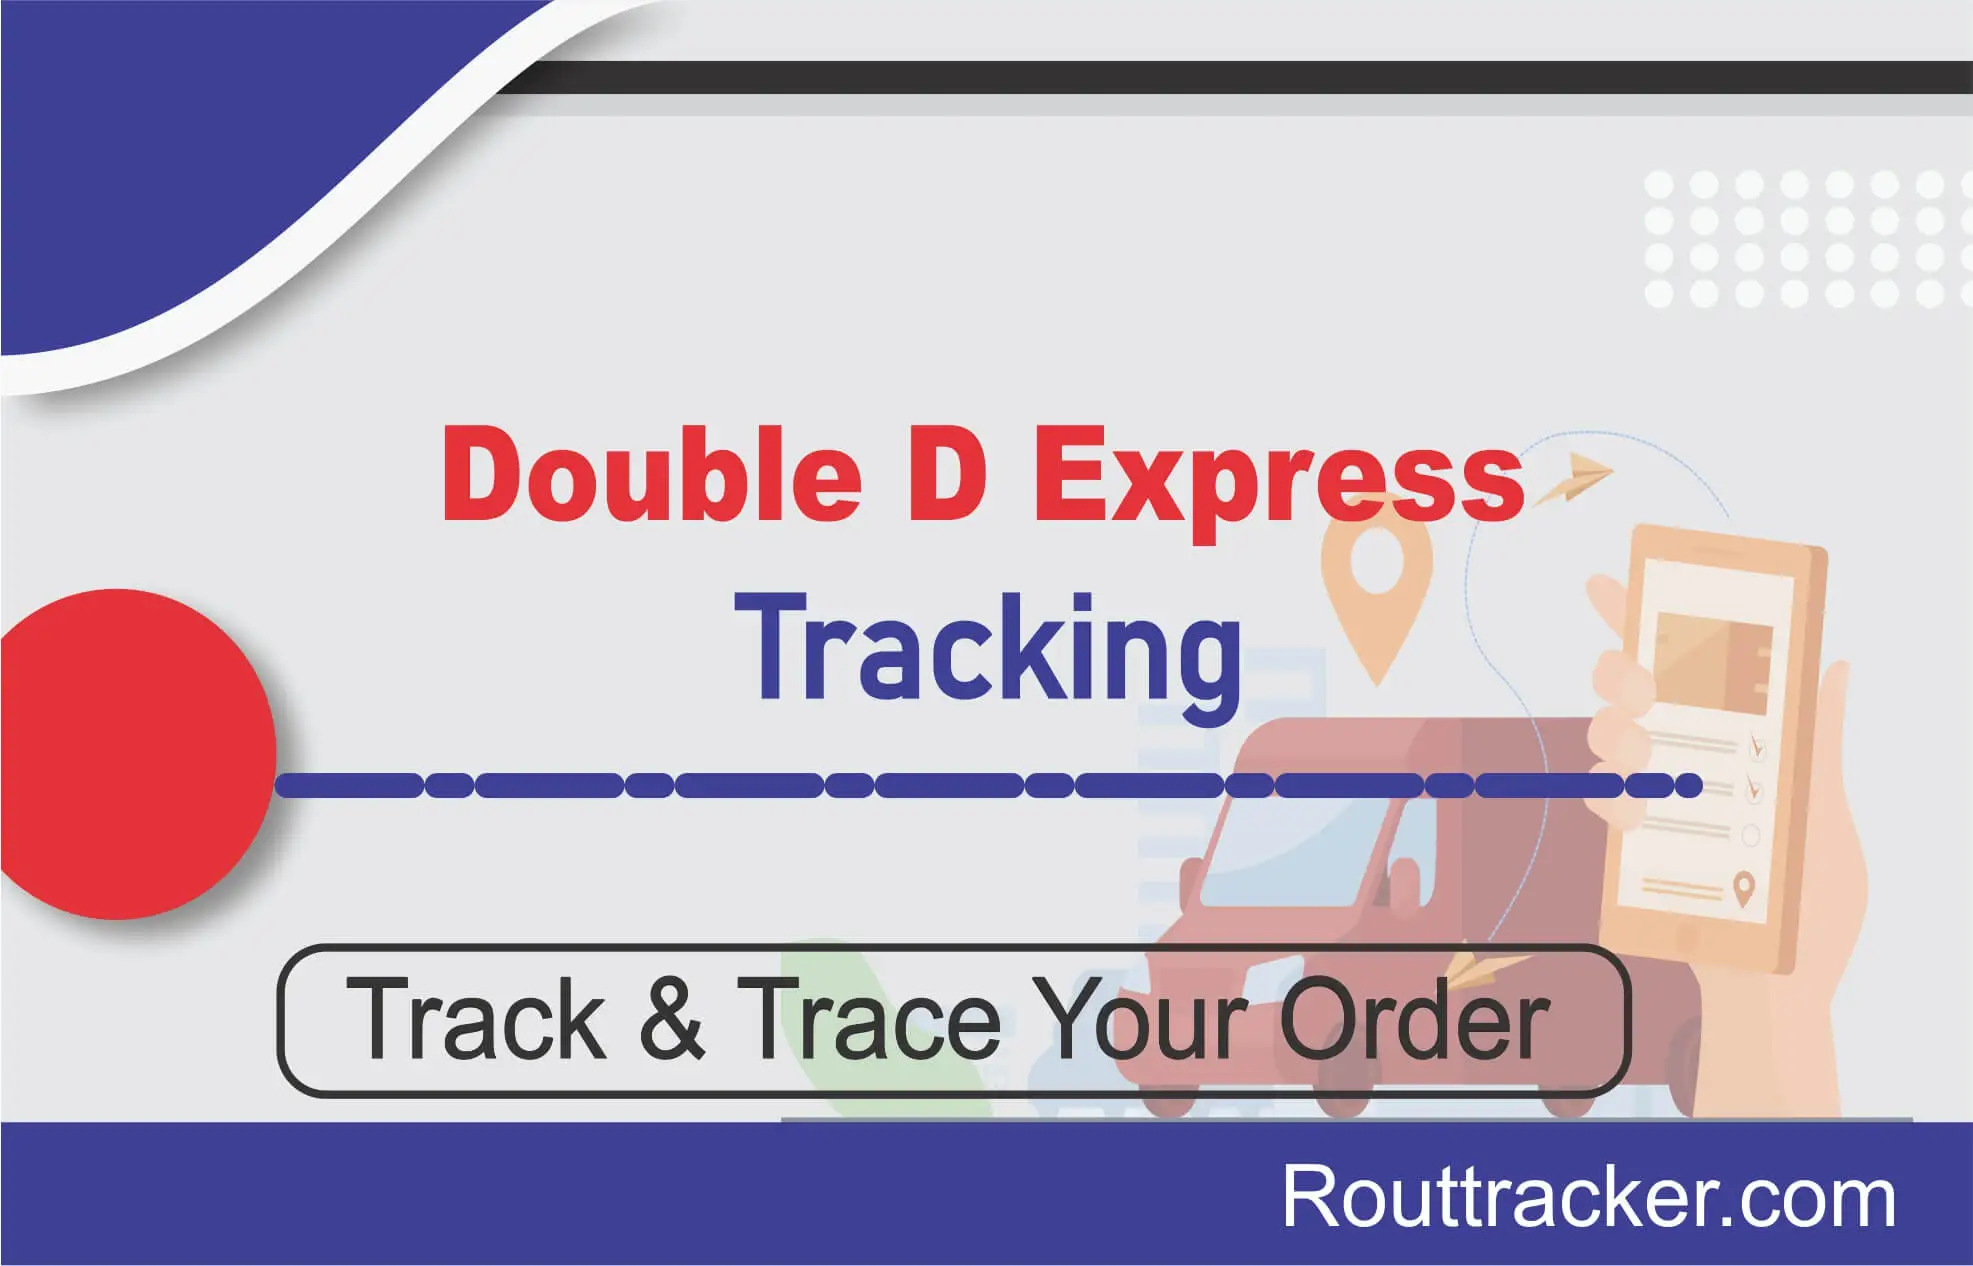 Double D Express Tracking